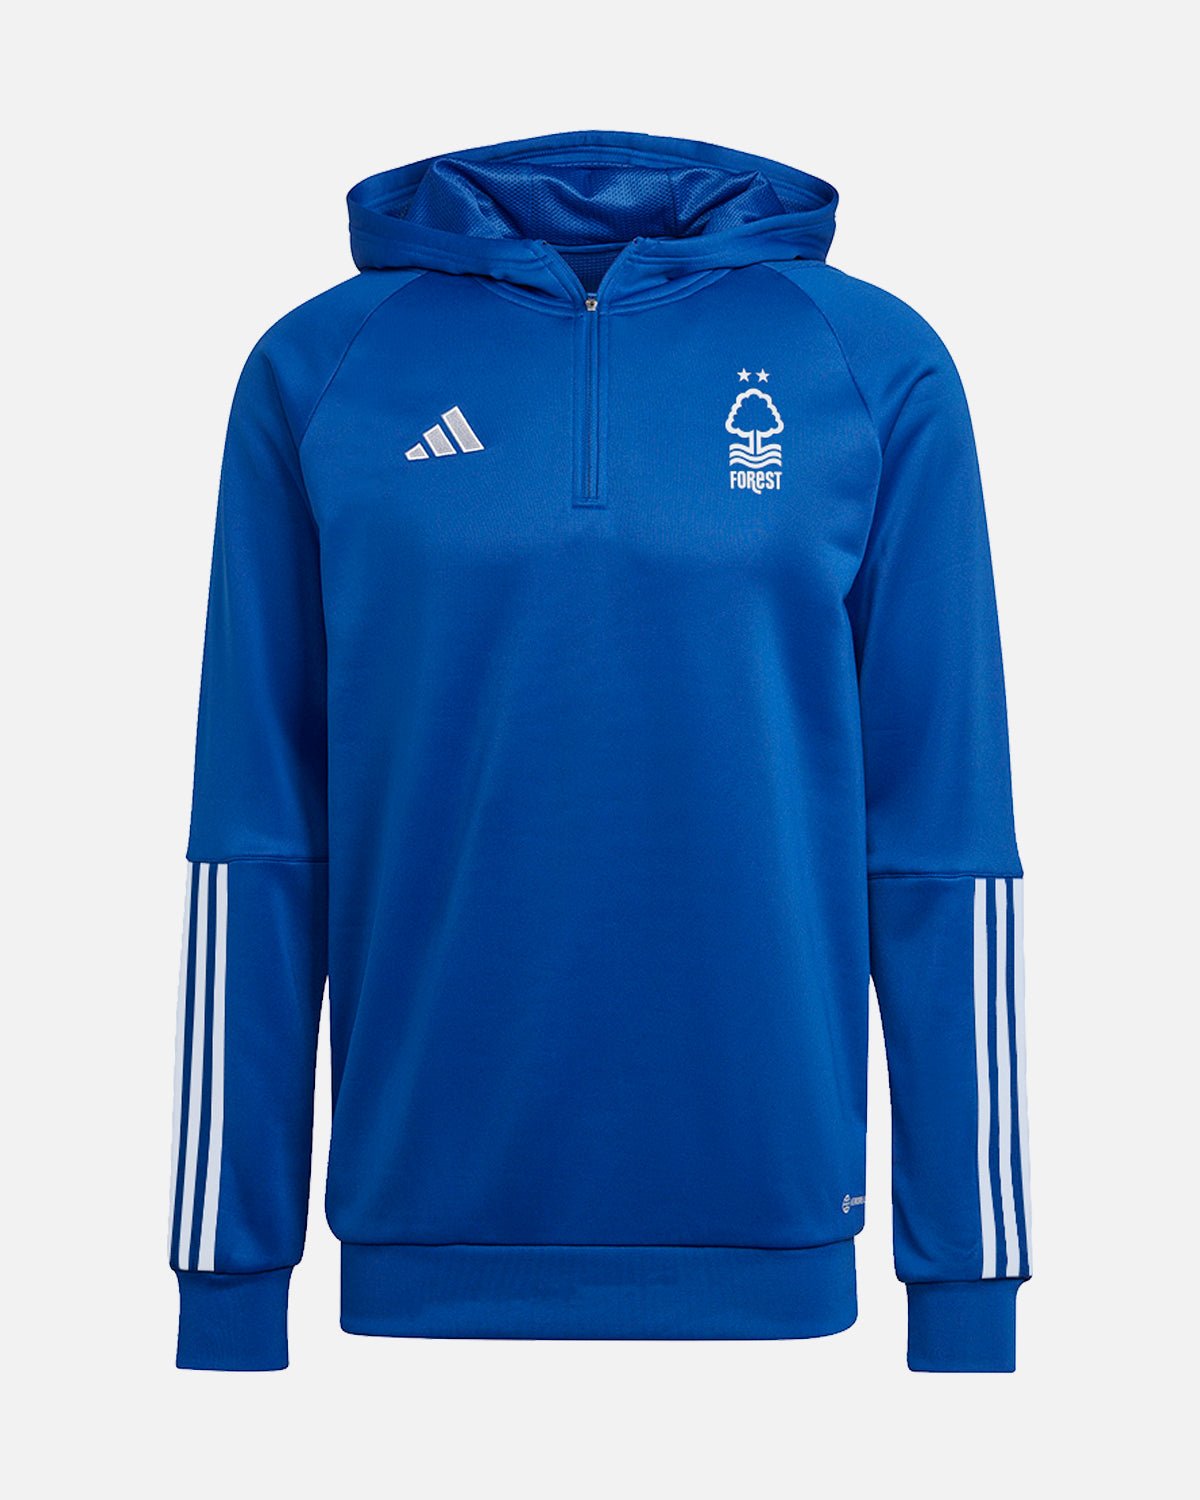 NFFC Royal Travel Hoodie 23-24 - Nottingham Forest FC